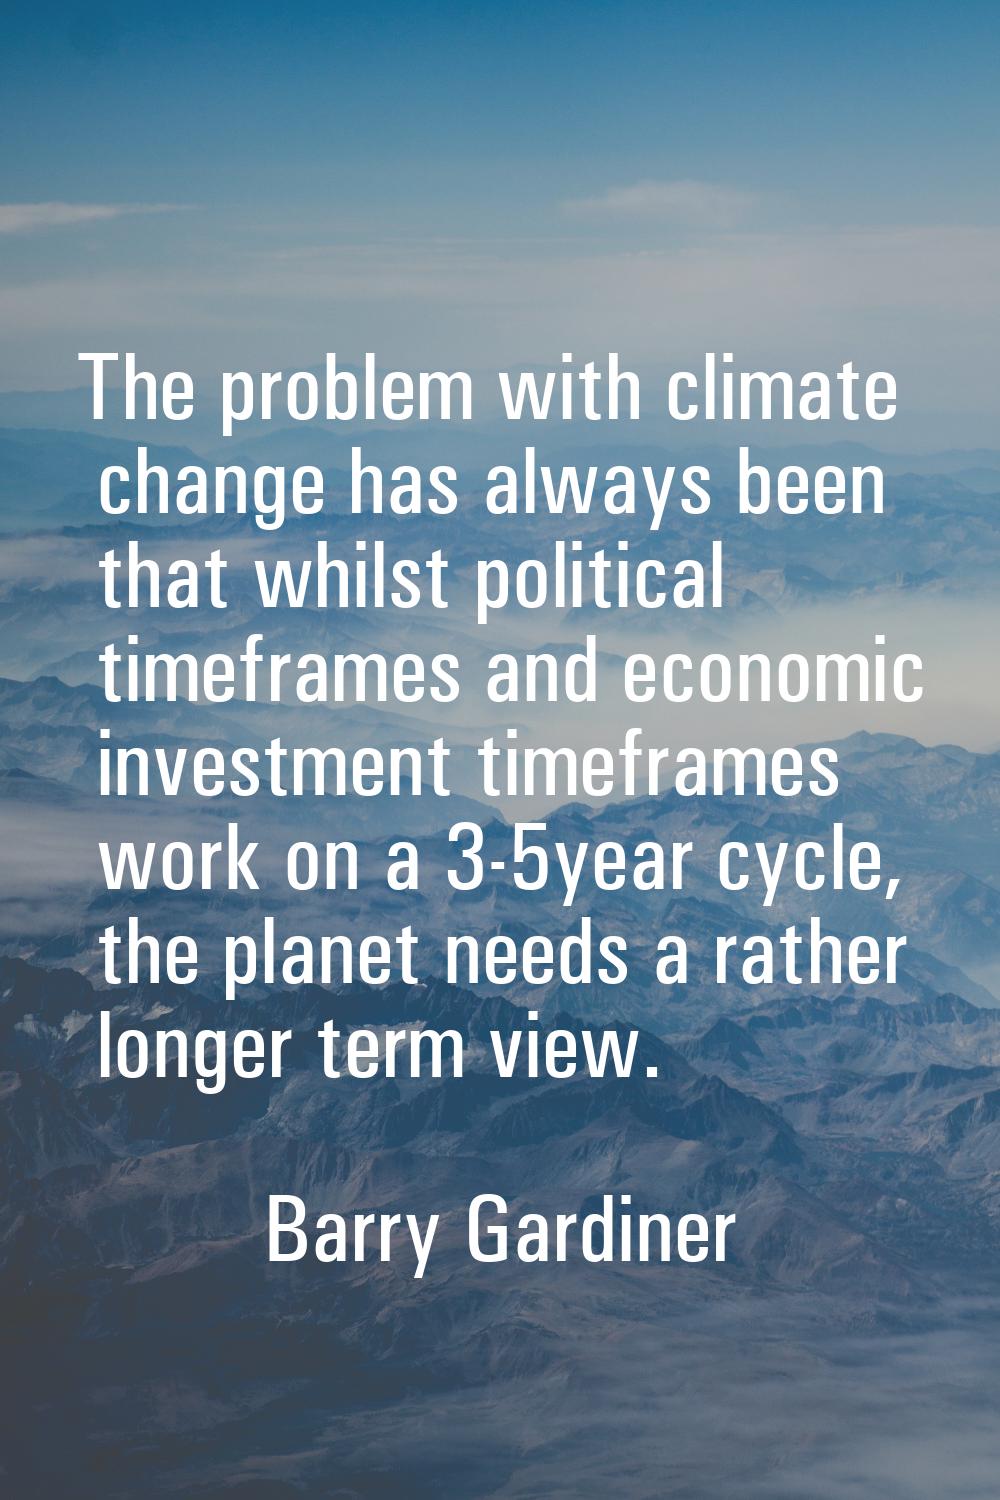 The problem with climate change has always been that whilst political timeframes and economic inves